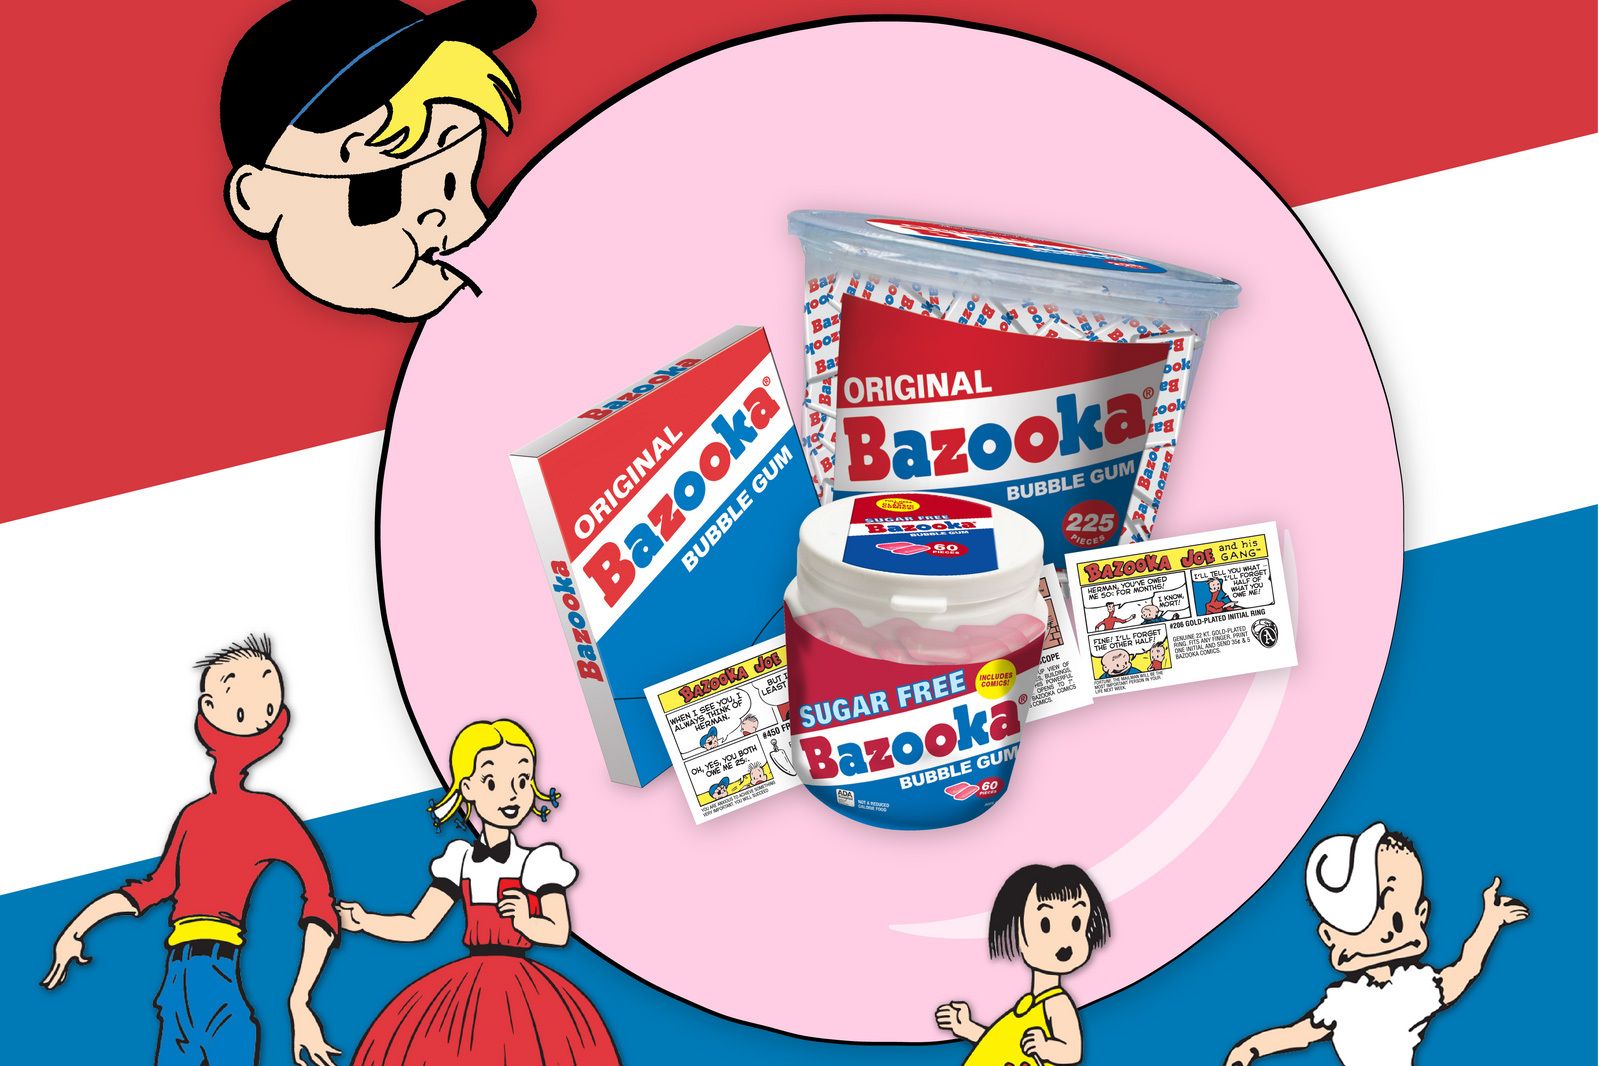 A cartoon Bazooka Joe blows a bubble containing containers of Bazooka gum. The background has red, white and blue stripes and members of Bazooka Joe's gang are at the bottom.